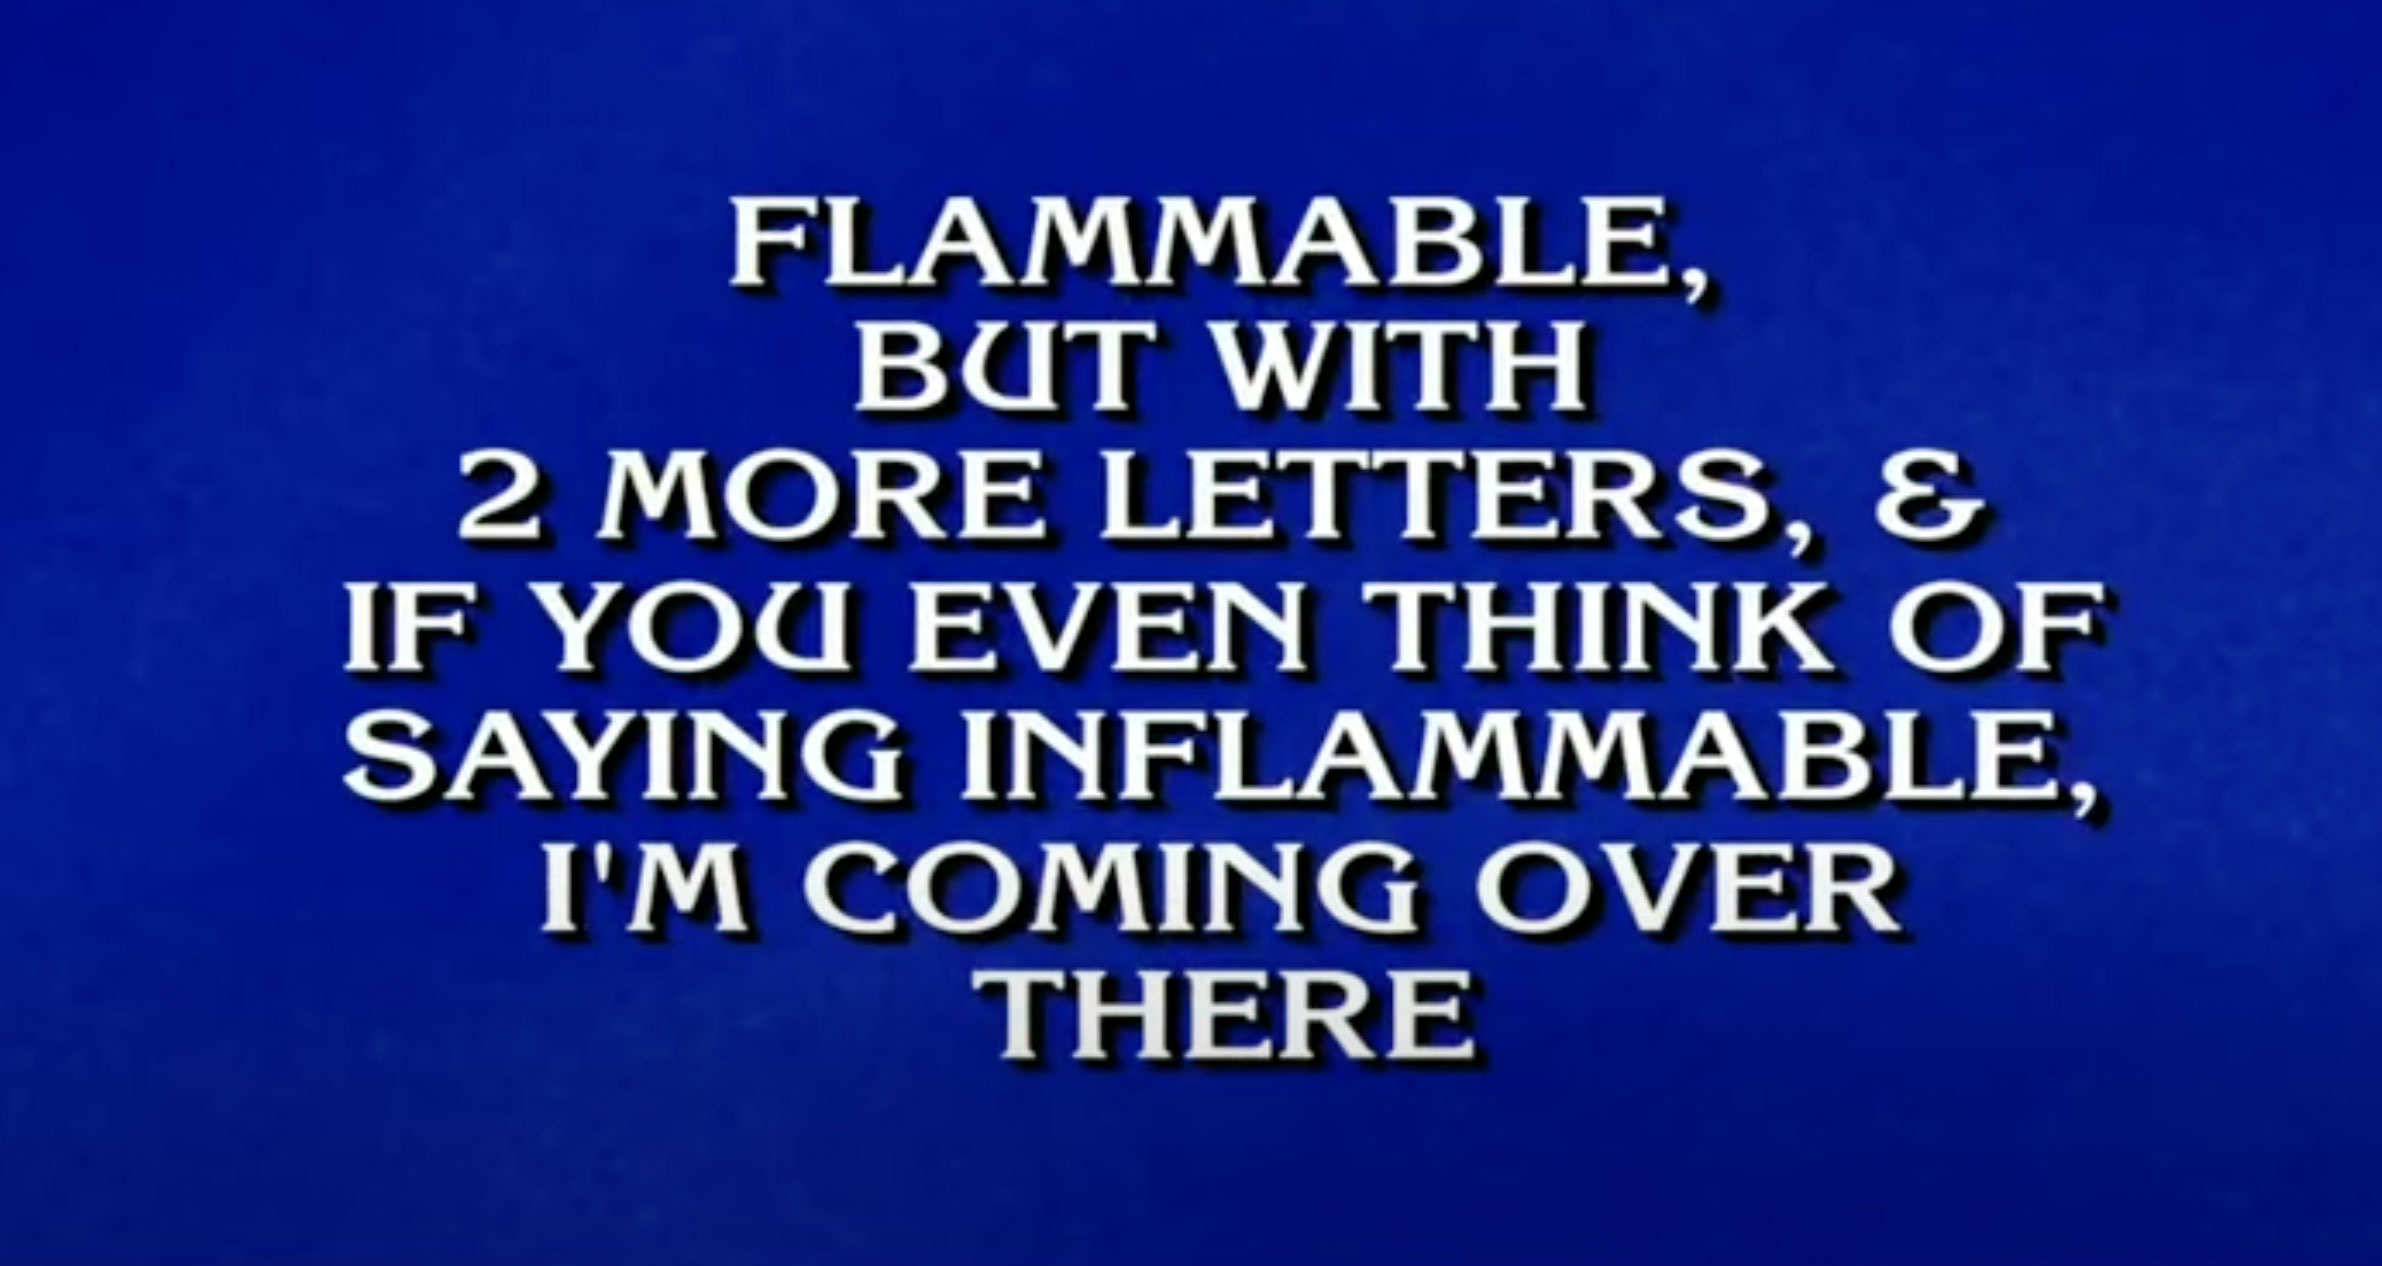 A contestant seemingly challenged Ken's promise to throw hands by saying none other than 'inflammable'